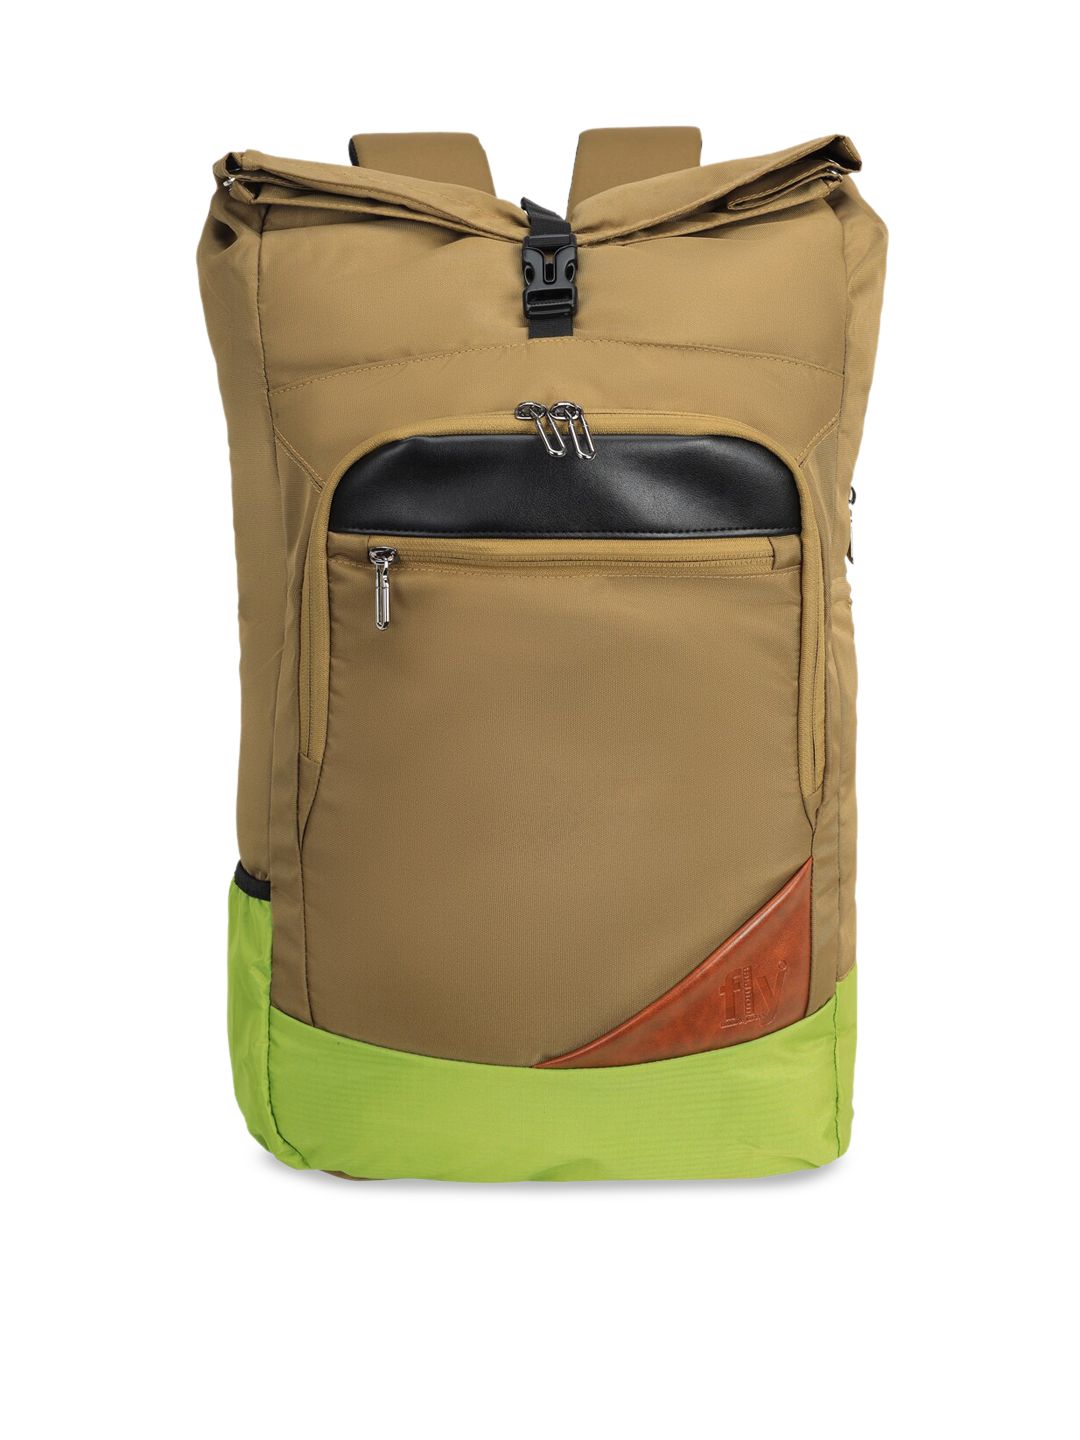 Fly Fashion Unisex Khaki & Lime Green Colourblocked Backpack Price in India